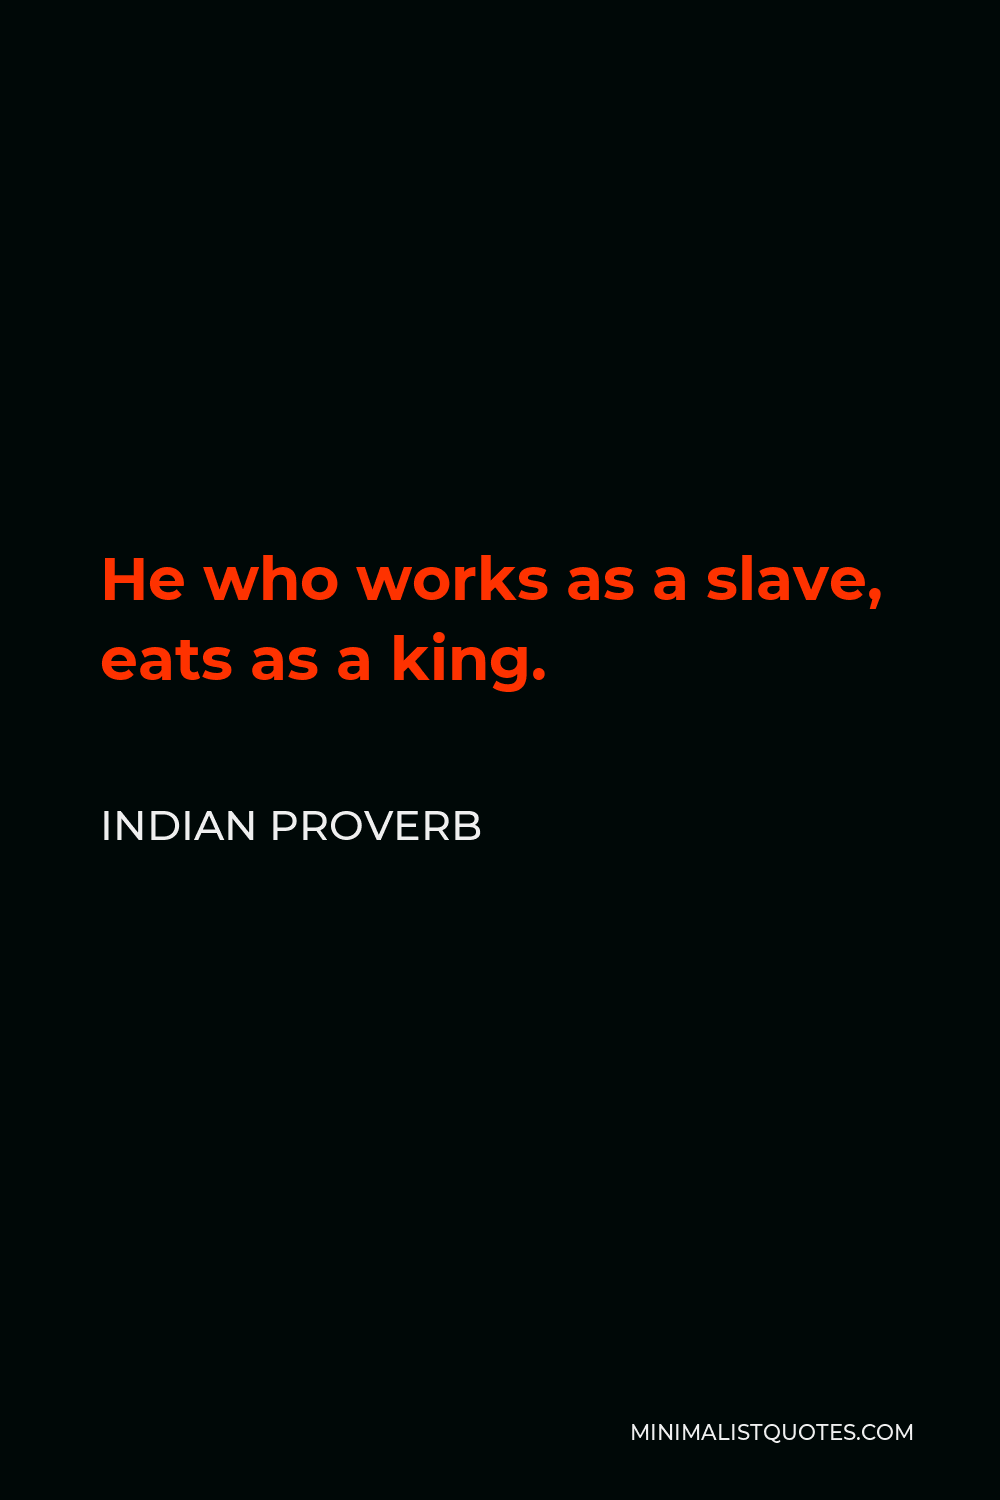 Indian Proverb Quote - He who works as a slave, eats as a king.